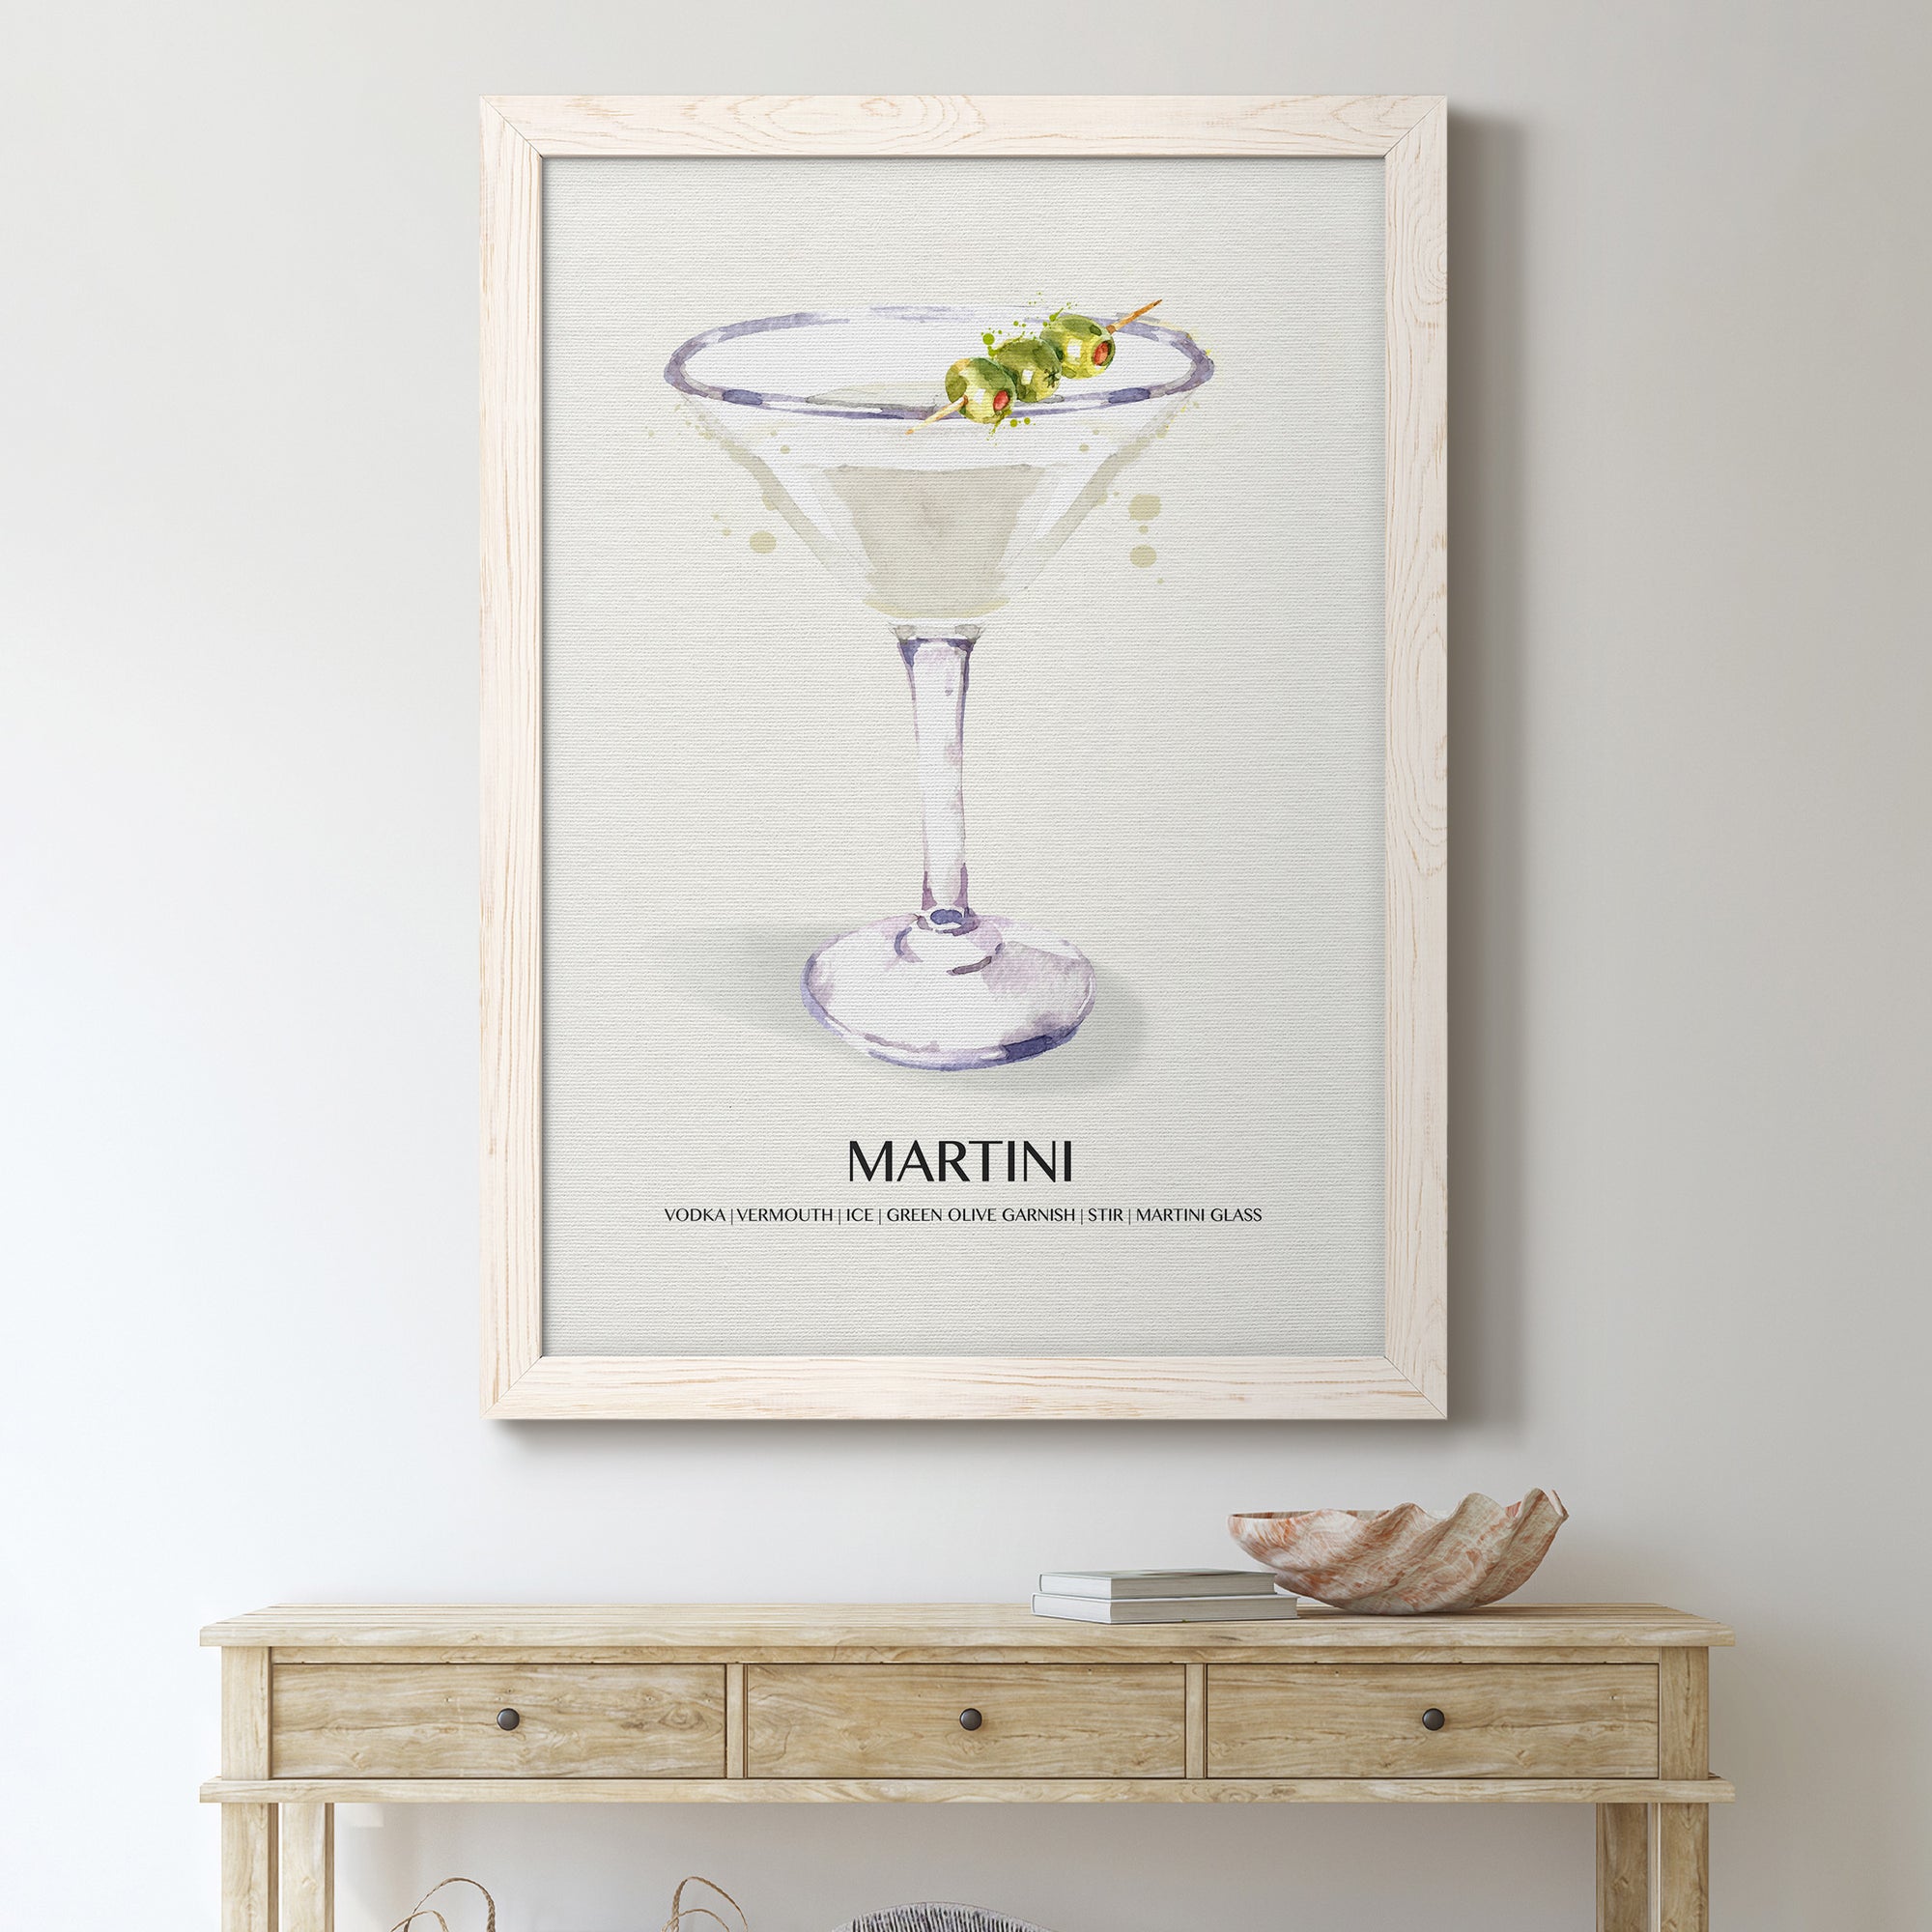 Martini - Premium Canvas Framed in Barnwood - Ready to Hang